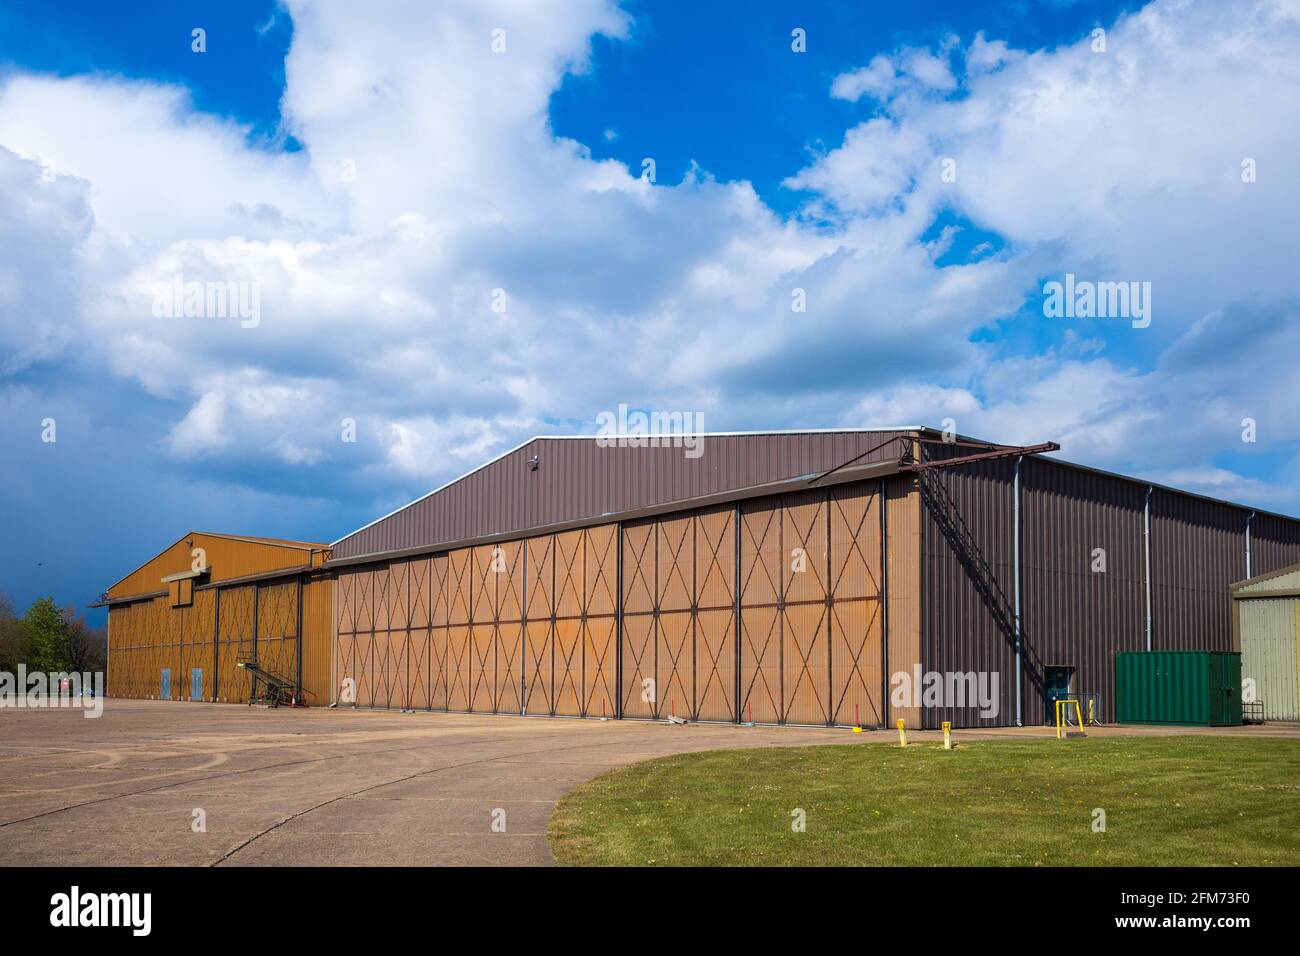 Duxford IWM Hangar 2 - Hangar 2 at the Imperial War Museum Duxford is  is a double Type T2 hangar, erected in the 1970s housing flying aircraft. Stock Photo